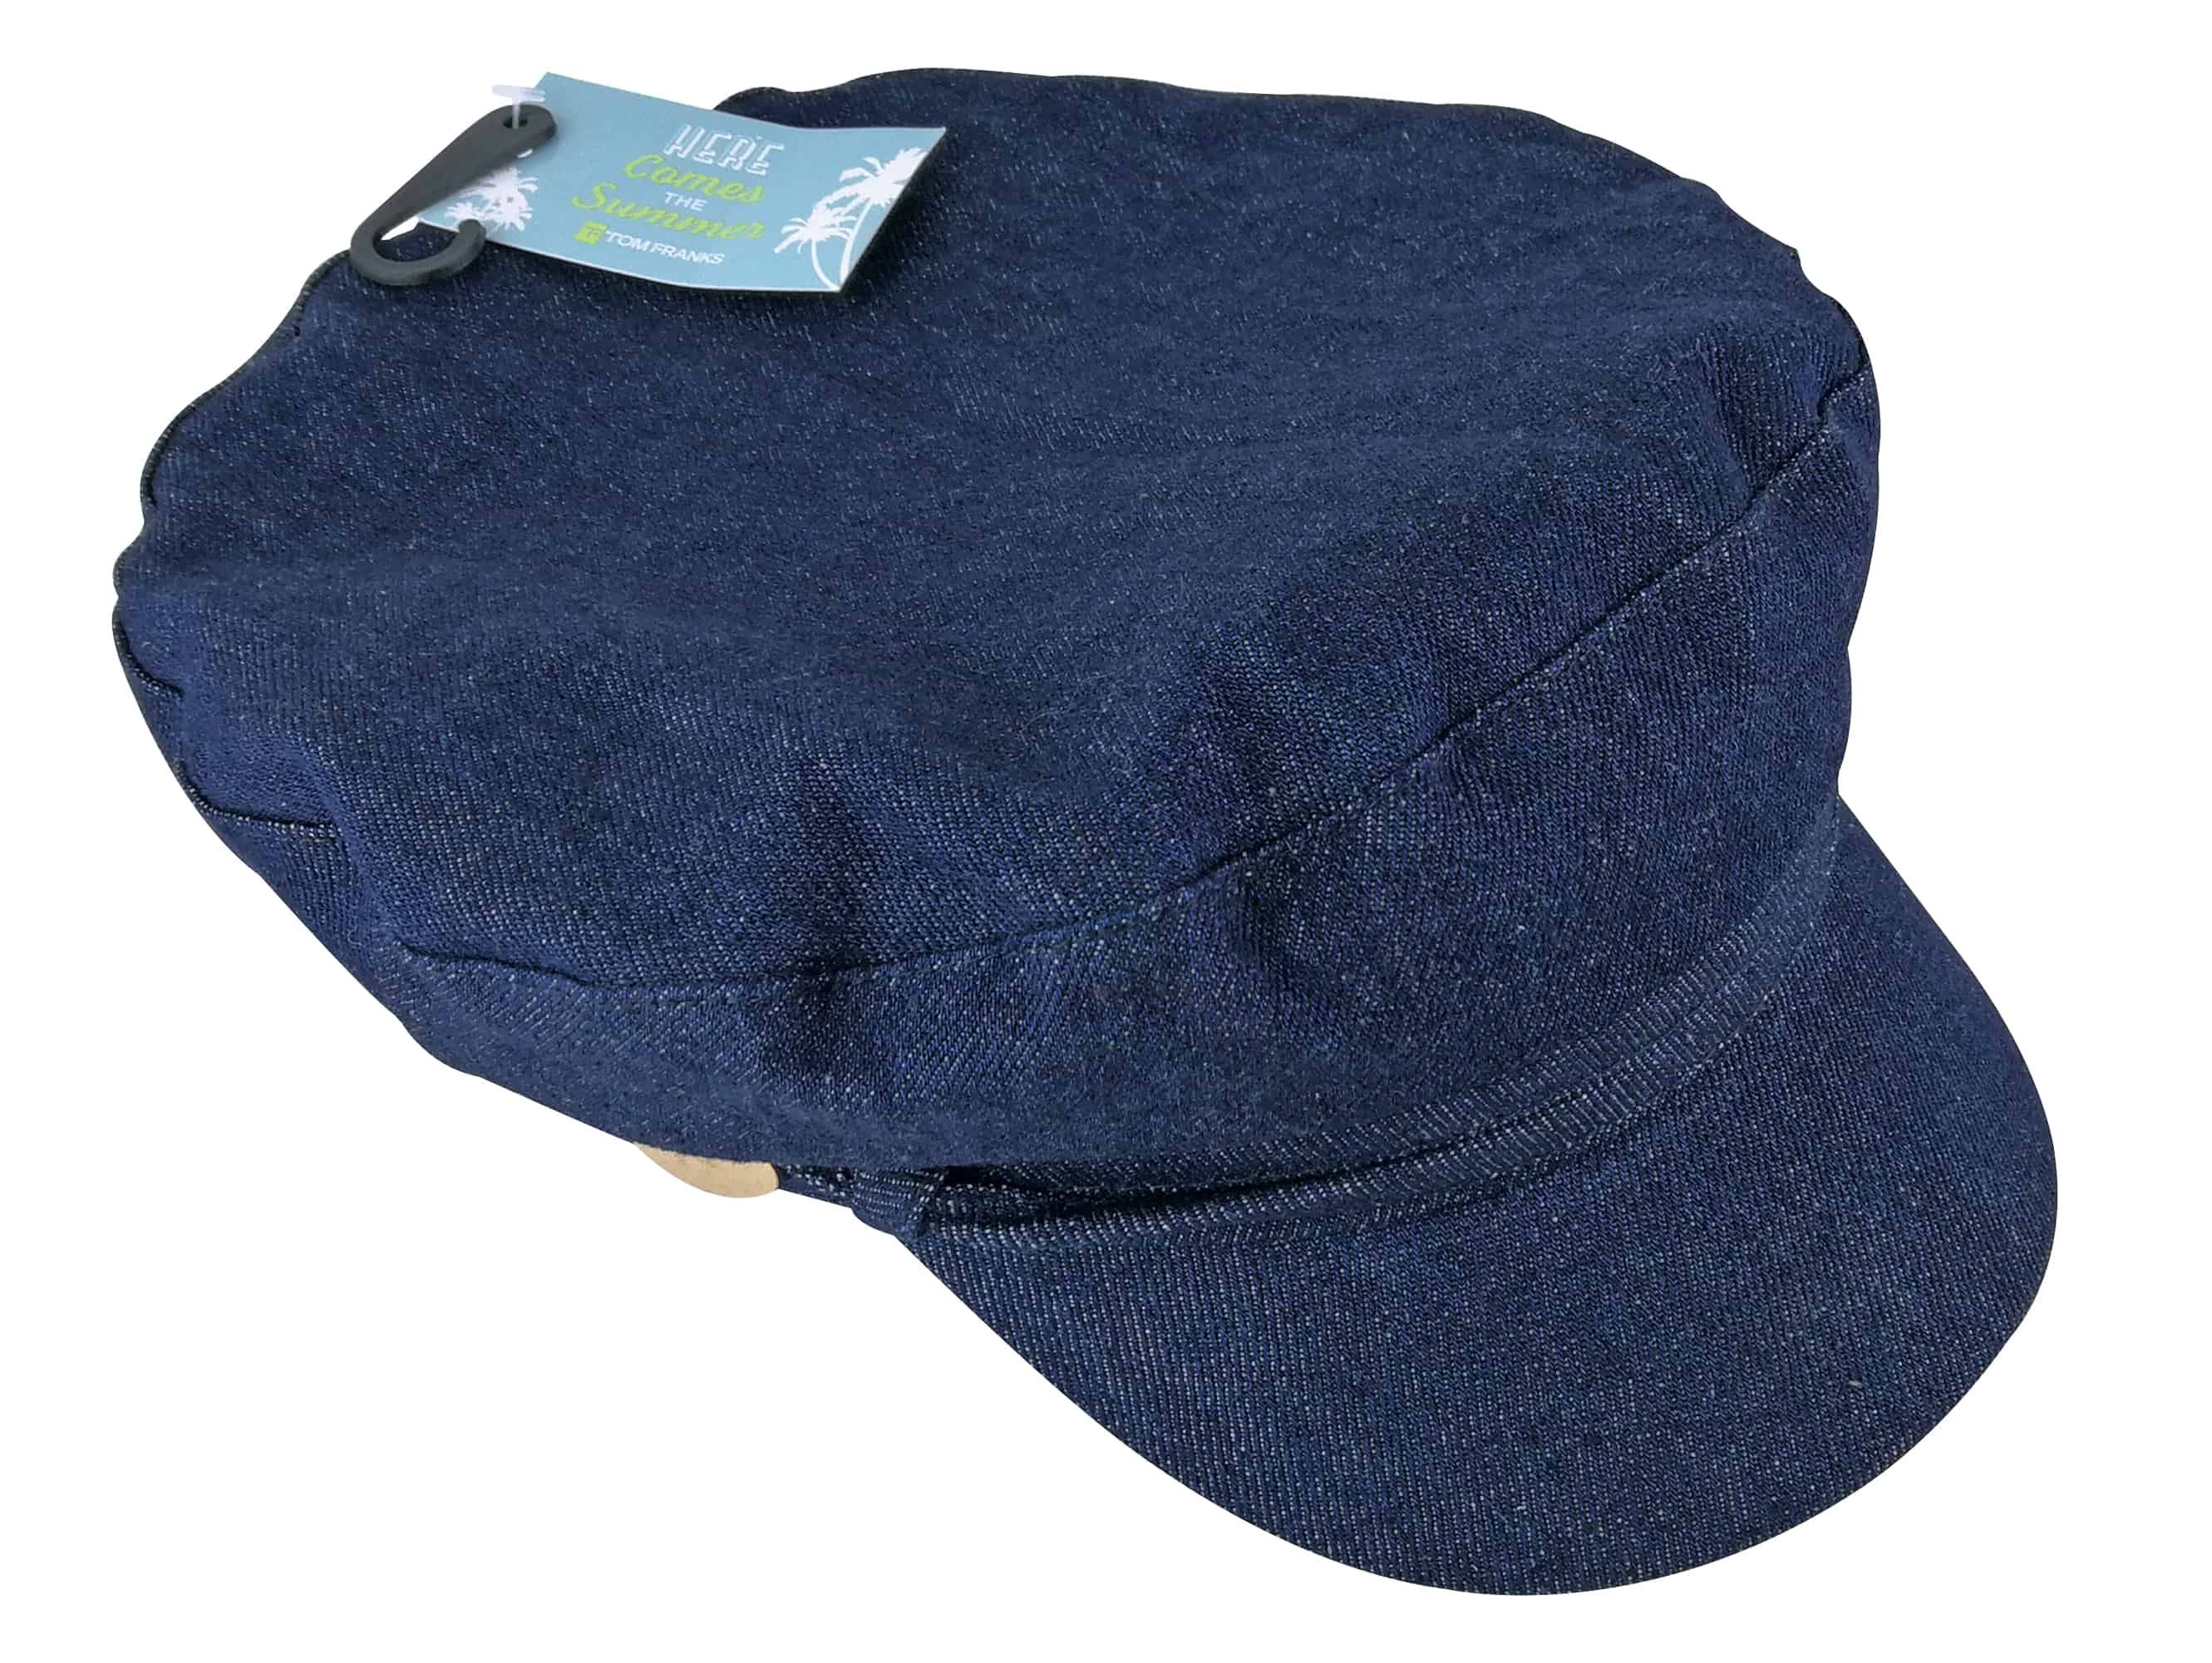 Ladies 100% Cotton Cord / Denim Flat Cap   If you are looking to bring a retro look back into your wardrobe then why not consider one of the options here on offer being a dark blue denim or a pink cord flat cap.   The cap has a solid visor to help keep the sun off your face. There are also gold coloured buttons on the side of the cap to enhance the vintage look on the flat cap. The cap is also made out of 100% cotton so that the feel is as soft as possible on your head.   These ladies cap are available in one size and are available in 2 designs. They are made from 100% cotton and they must be washed by hand.   Extra Product Details   Ladies Flat Caps  Denim & Cord Designs  One Size  Vintage Look  100% Cotton  Hand Washable